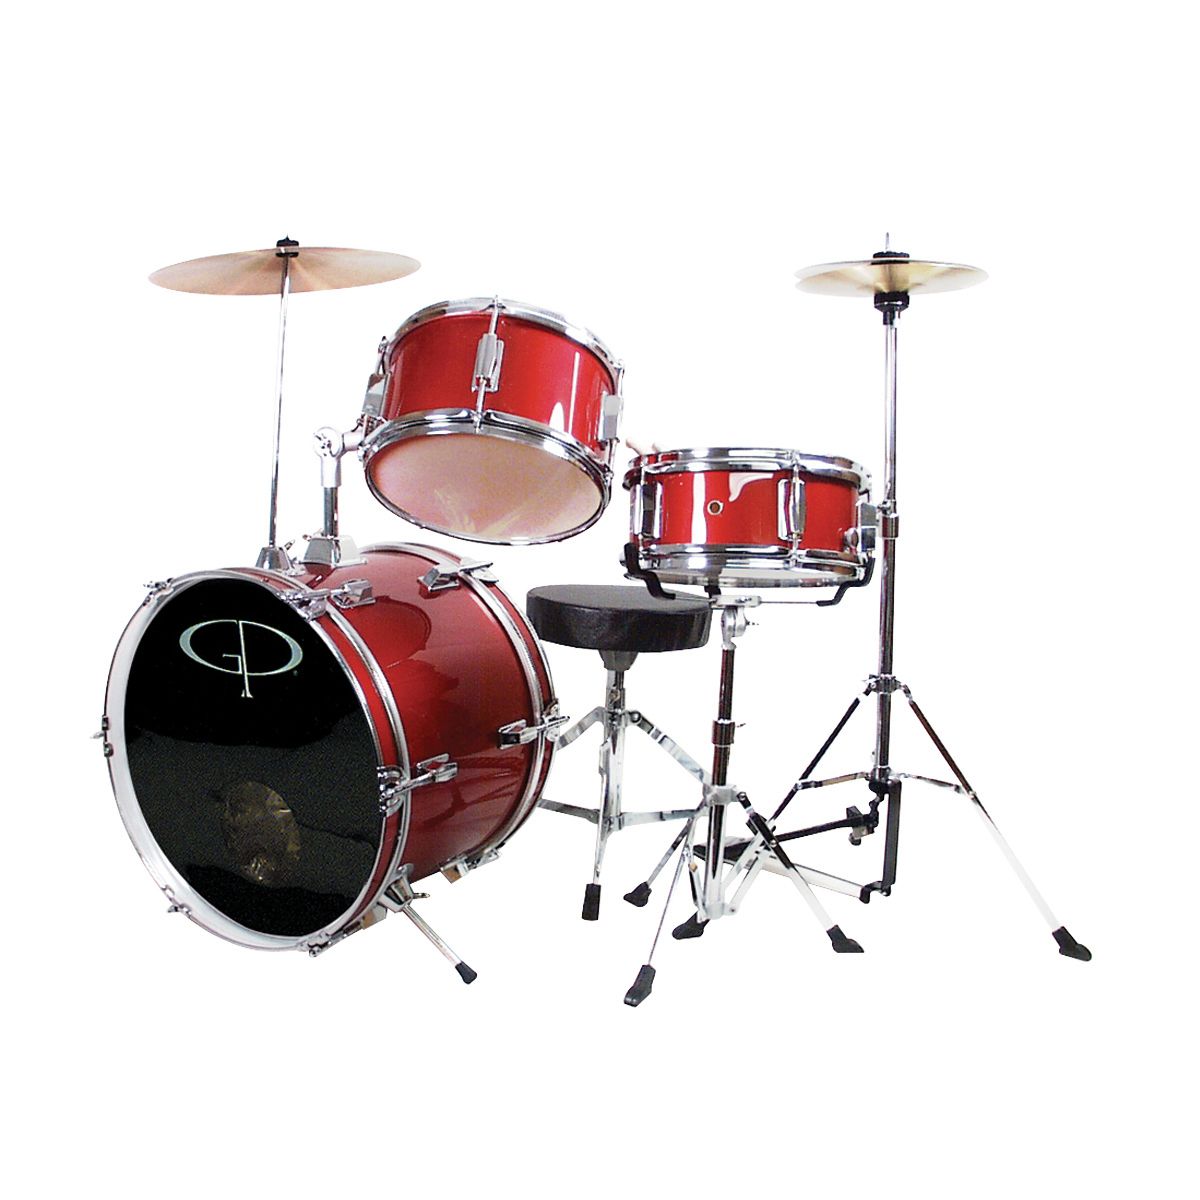 GP50 3-Piece Junior Drum Set With Cymbals and Throne in Metallic Red